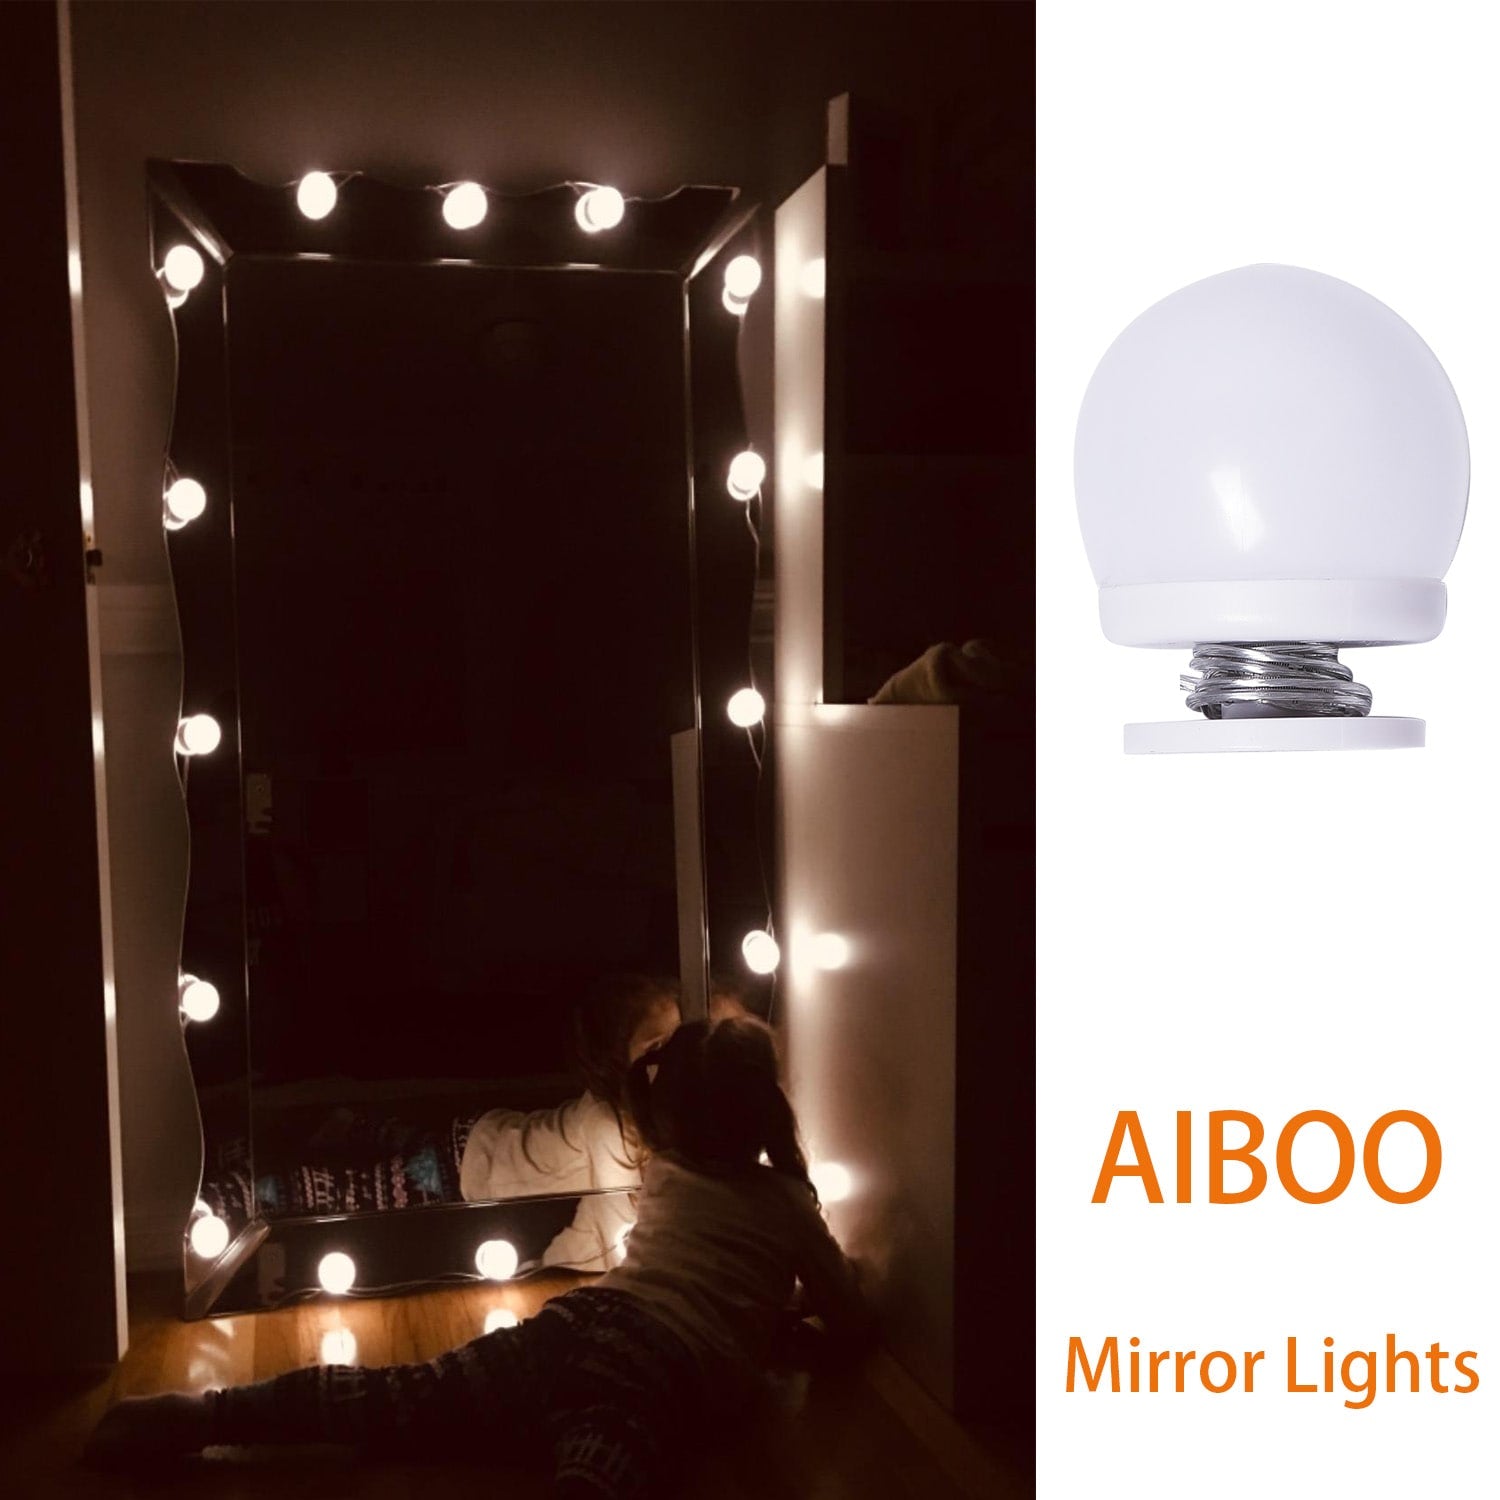 Makeup Mirror Lights (4000K, 16Bulbs, Plug in) Mirror Not Included